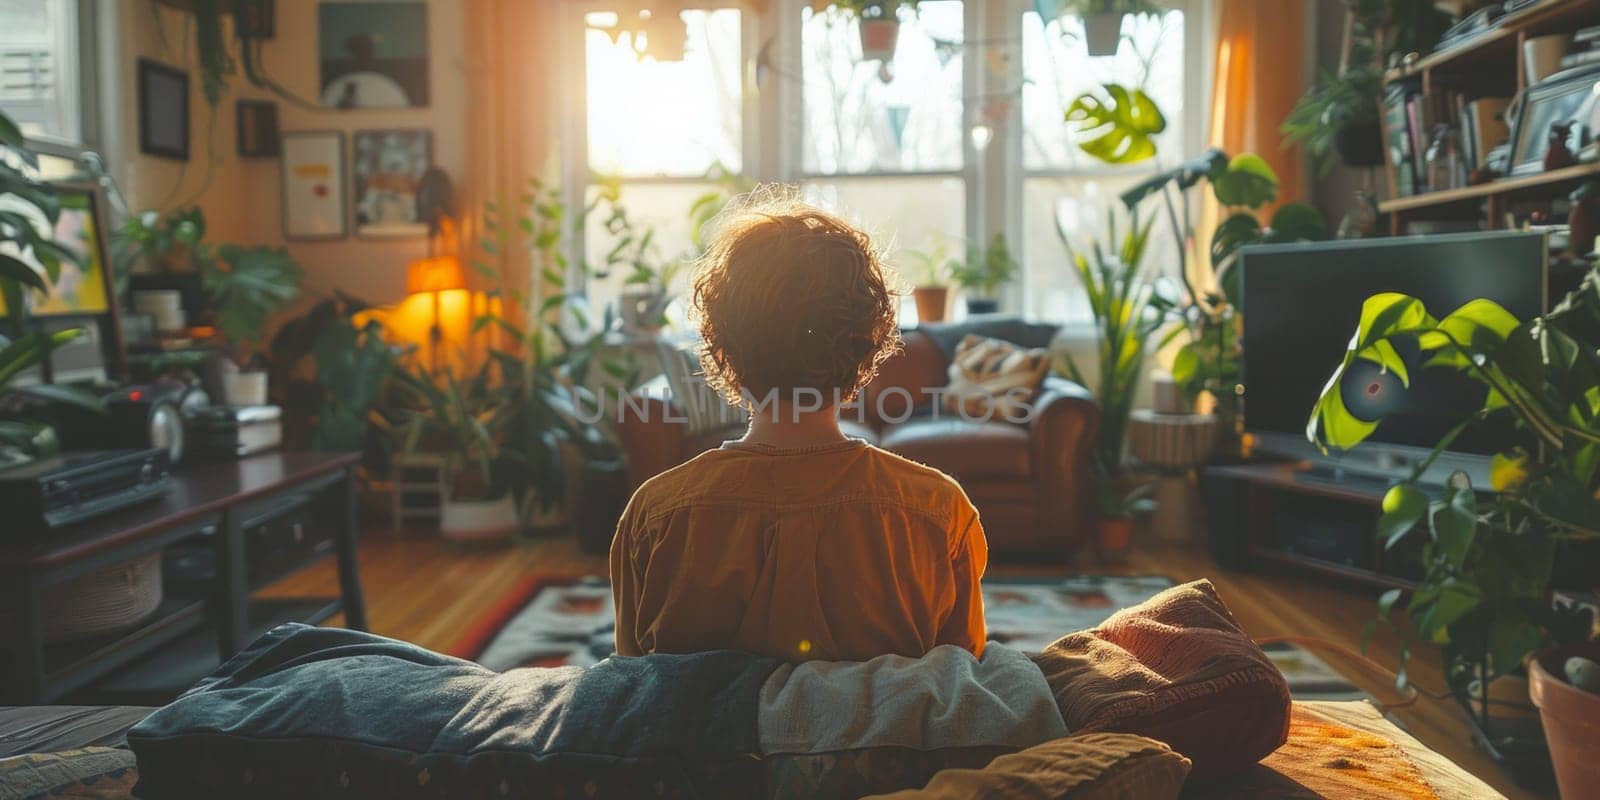 A person relaxes on a couch amidst the hustle and bustle of a living room with children washing the floors by but_photo